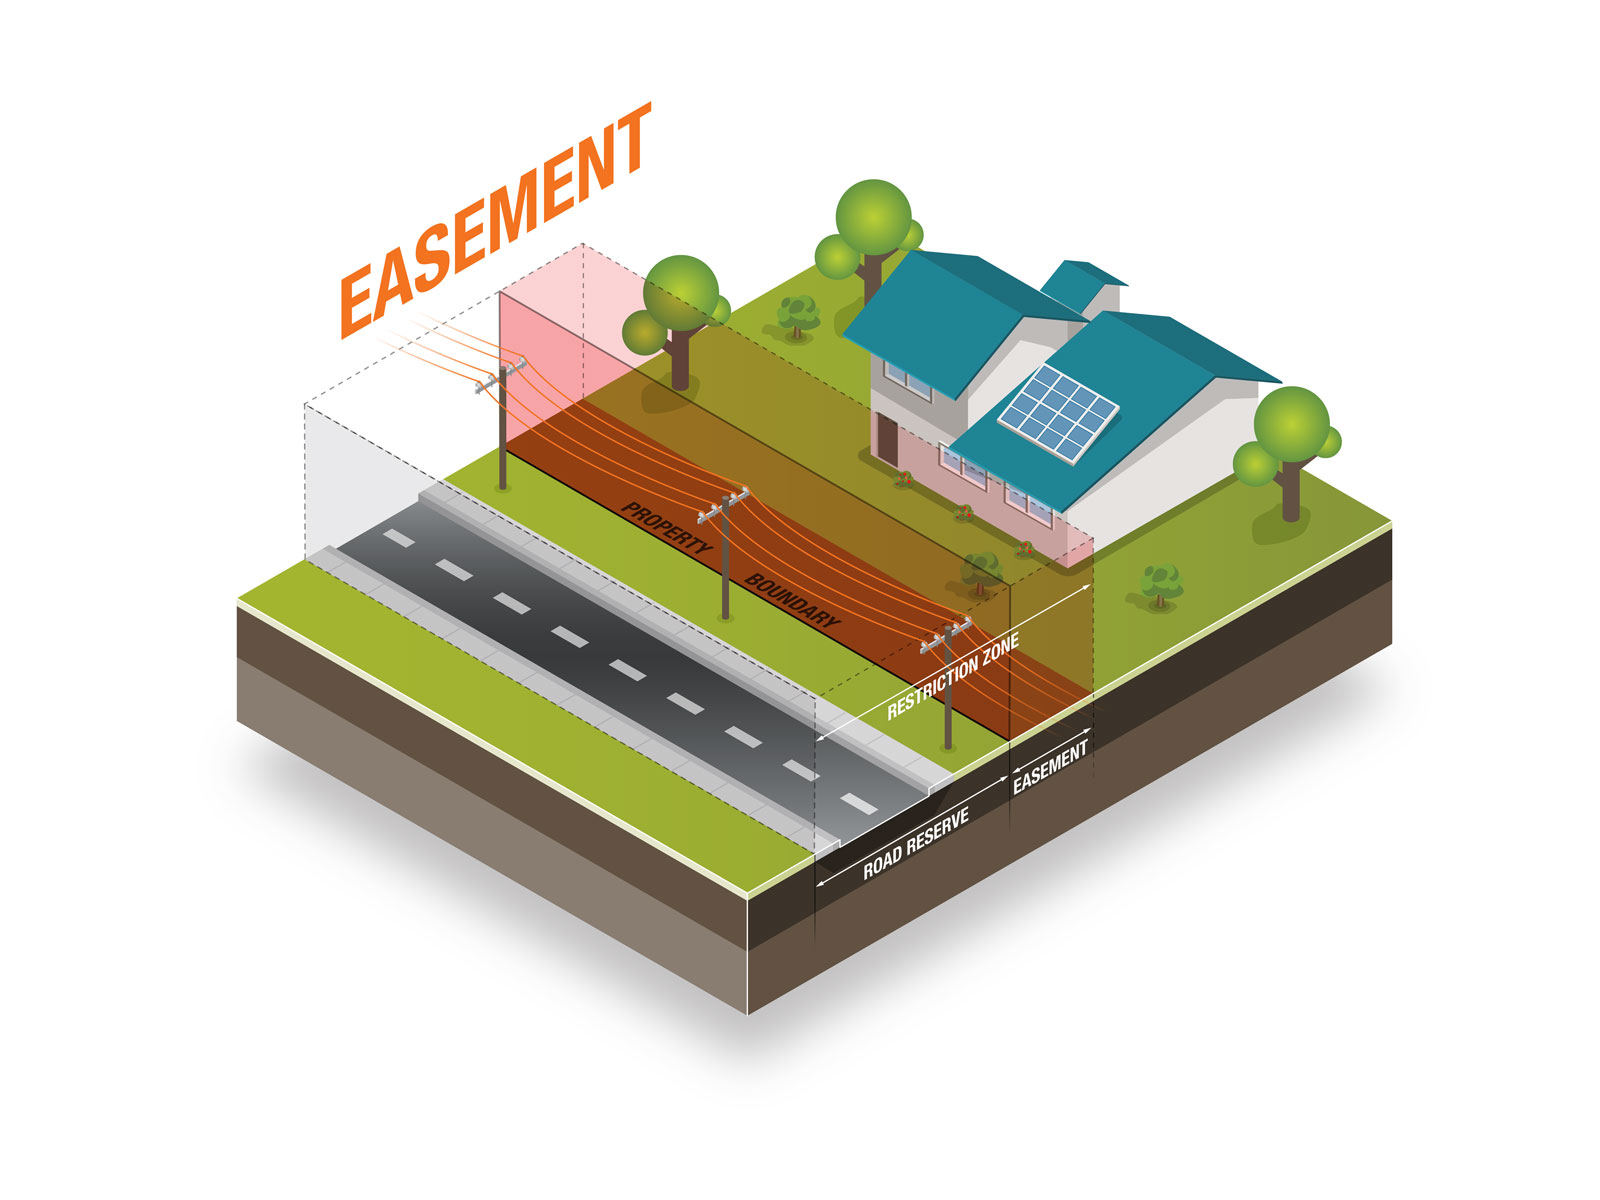 Isometric illustration depicting restricted zone for power lines